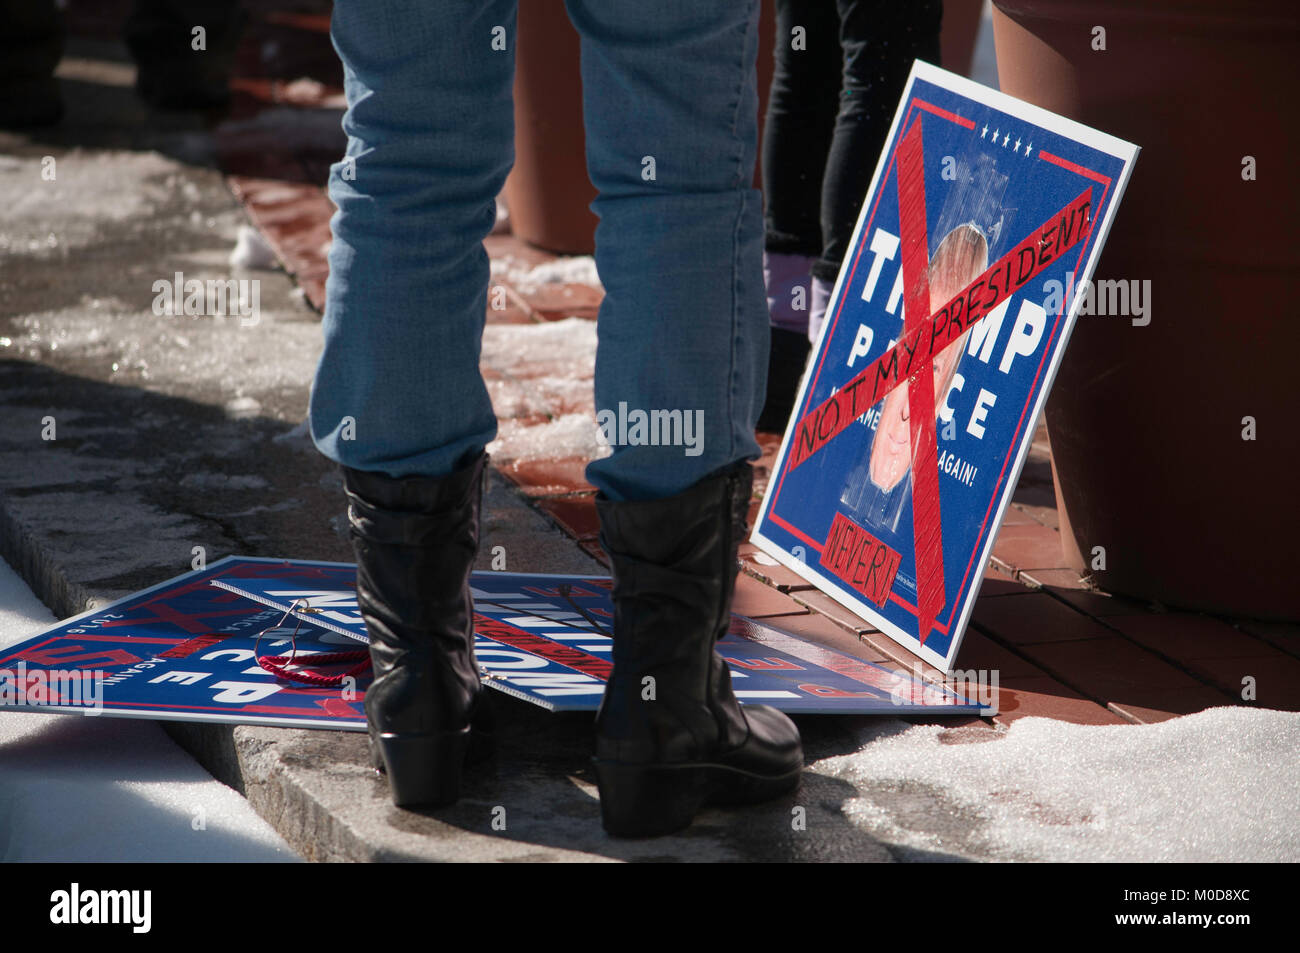 Dayton, Ohio joins the nation on Saturday January 20th by holding their own Women's Rights rally at the Montgomery County courthouse. Credit: Martin Wheeler/Alamy Live News Stock Photo